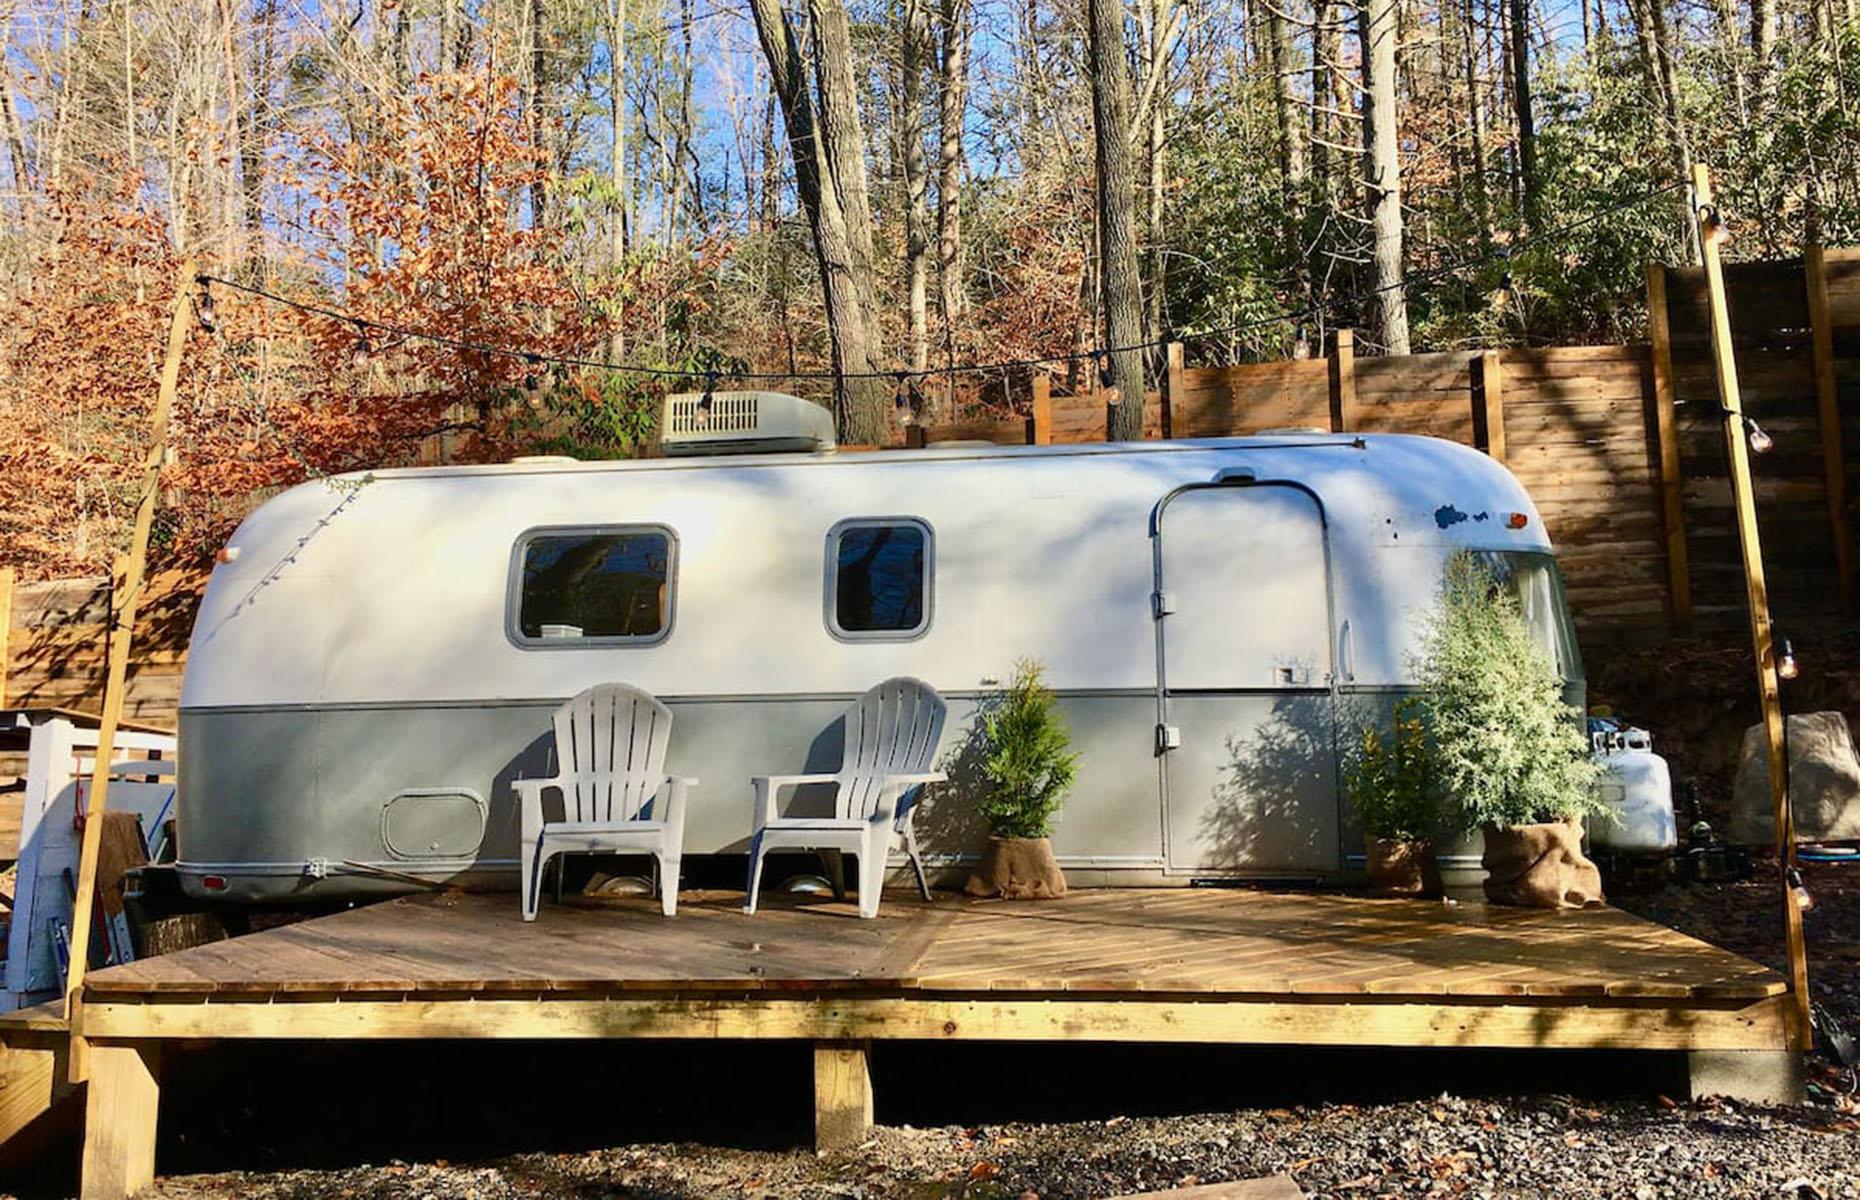 <p>The RhodoDen is a cosy 1974 <a href="https://www.airbnb.com/rooms/40321685?source_impression_id=p3_1718032329_P3Bn8YMECr5YLQDj">Airstream Argosy</a> nestled among the rhododendrons of North Carolina’s gorgeous Blue Ridge Mountains. Set beside a picturesque creek, it makes the perfect base to relax, hike mountain trails or enjoy the dining and nightlife in nearby Asheville and Black Mountain.</p>